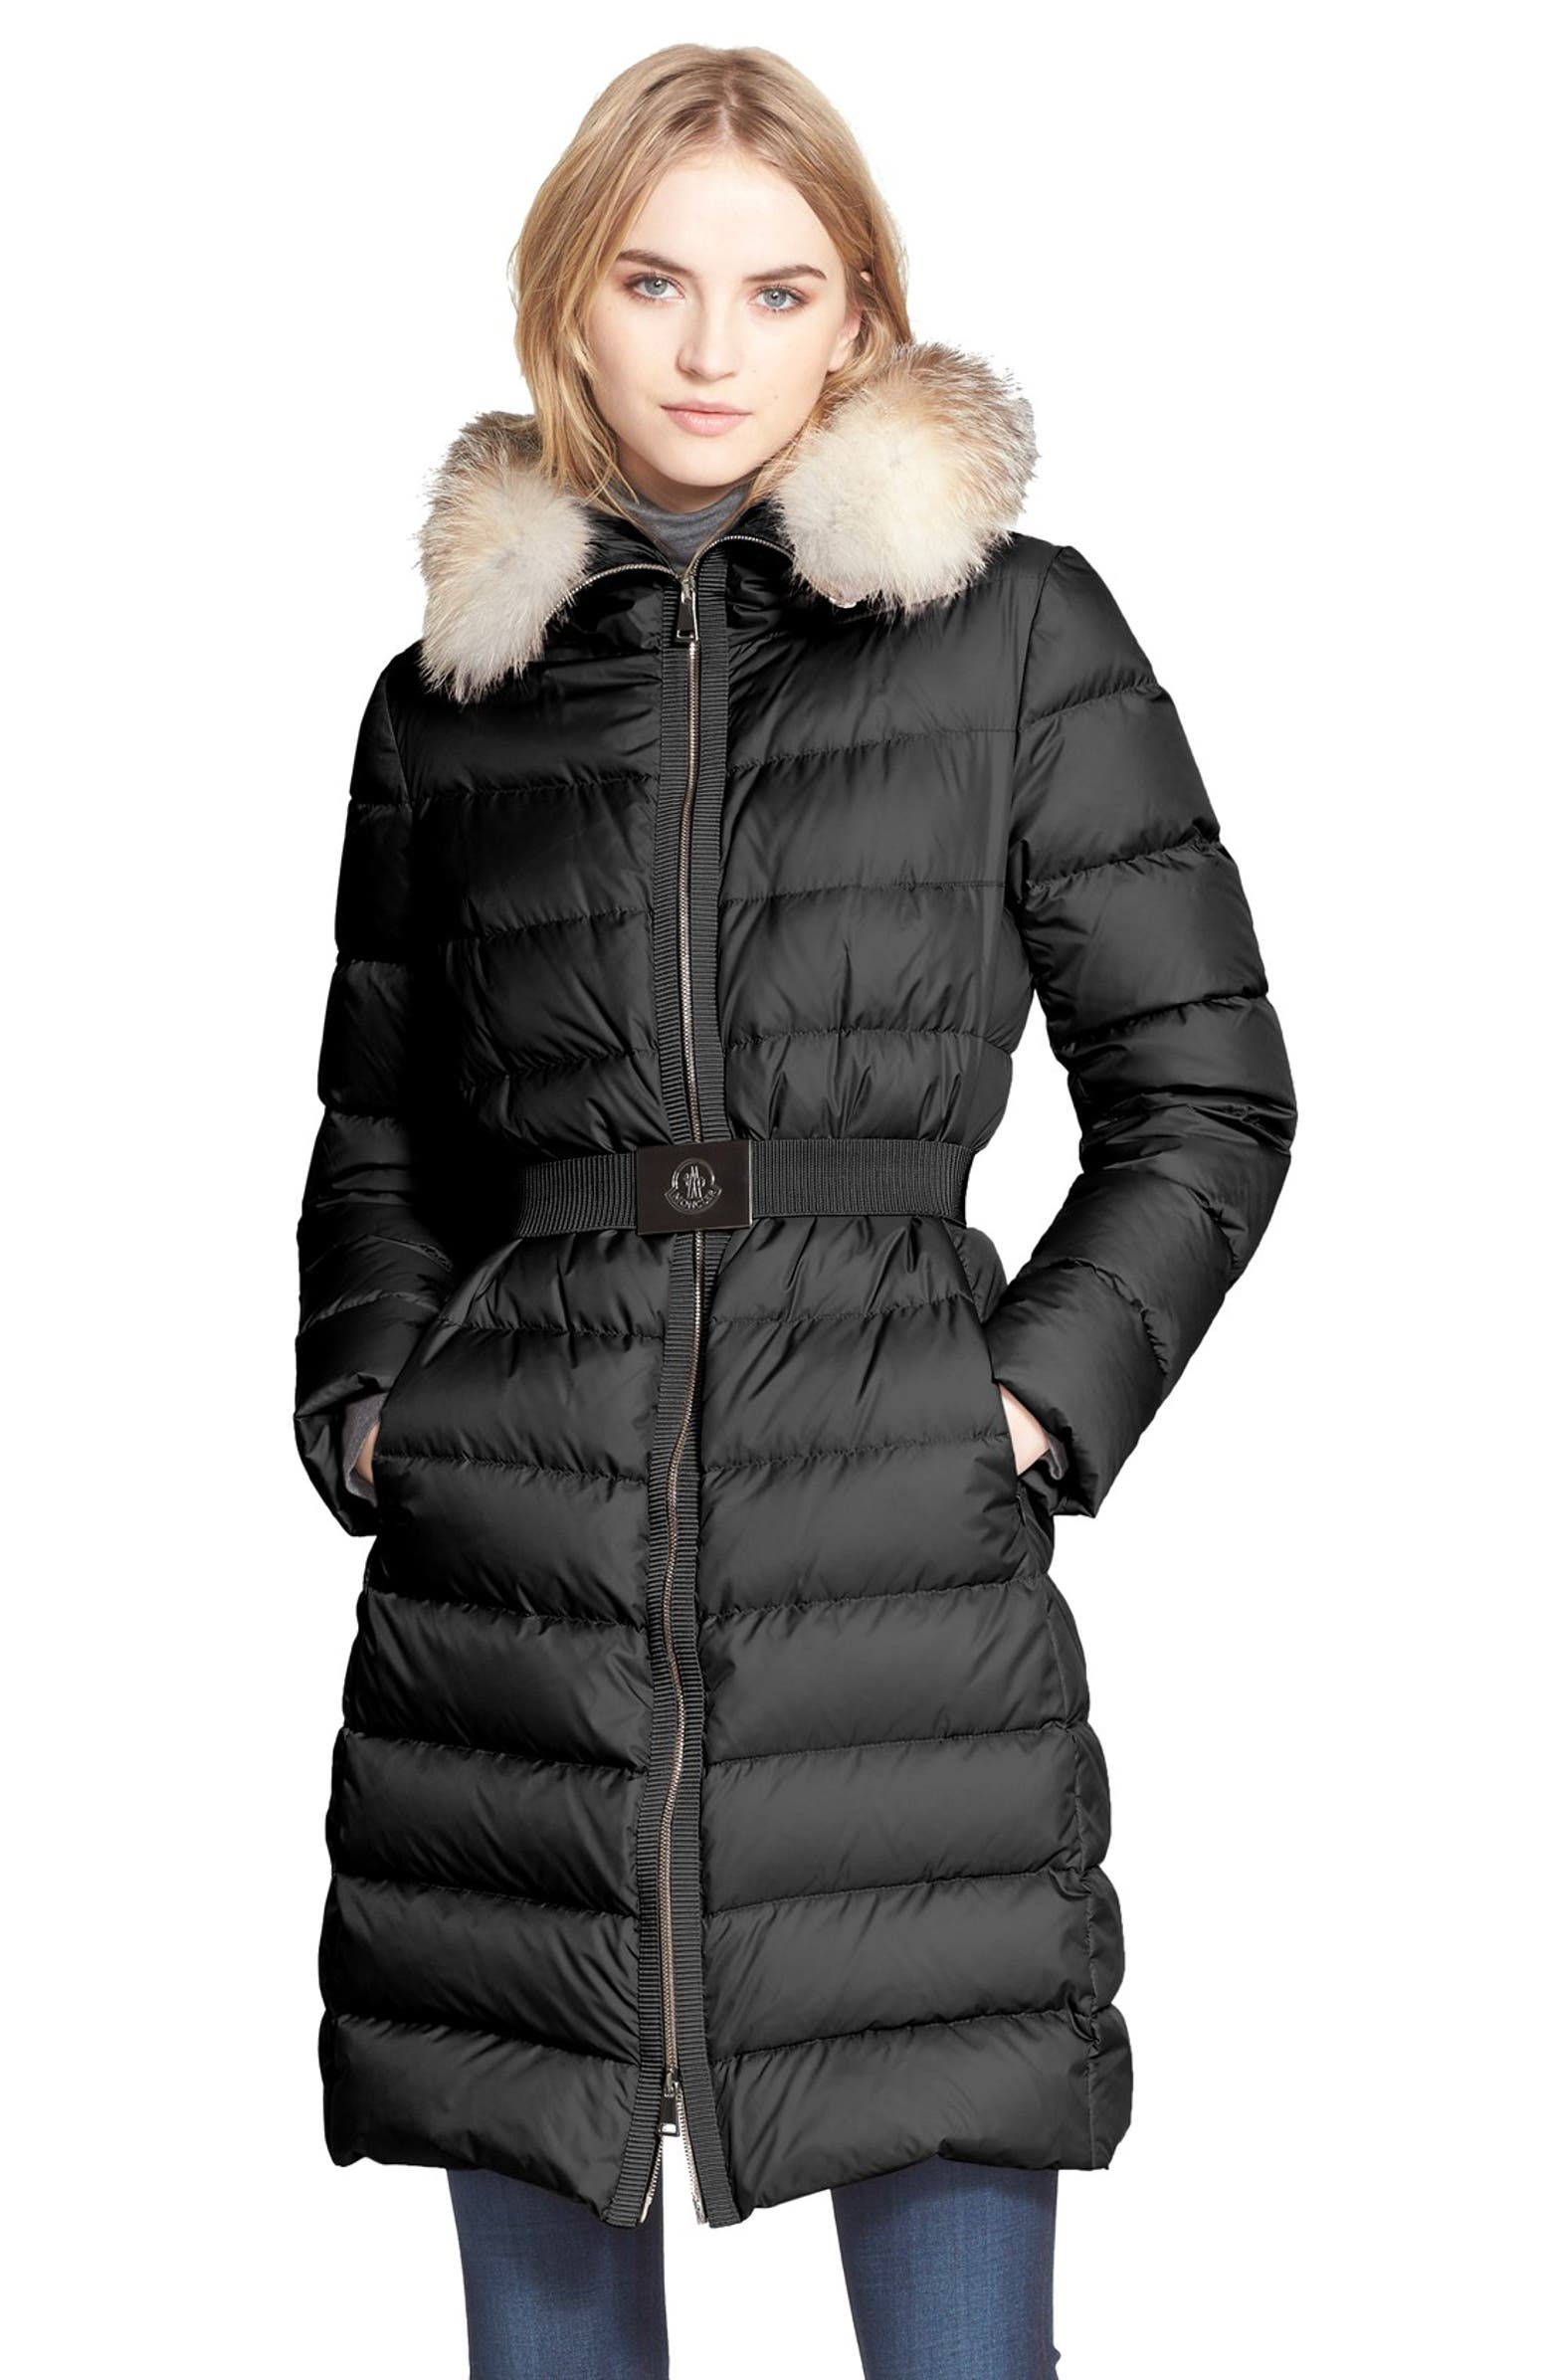 Moncler 'Fabrefox' Belted Puffer Coat with Genuine Fox Fur Ruff | Nordstrom